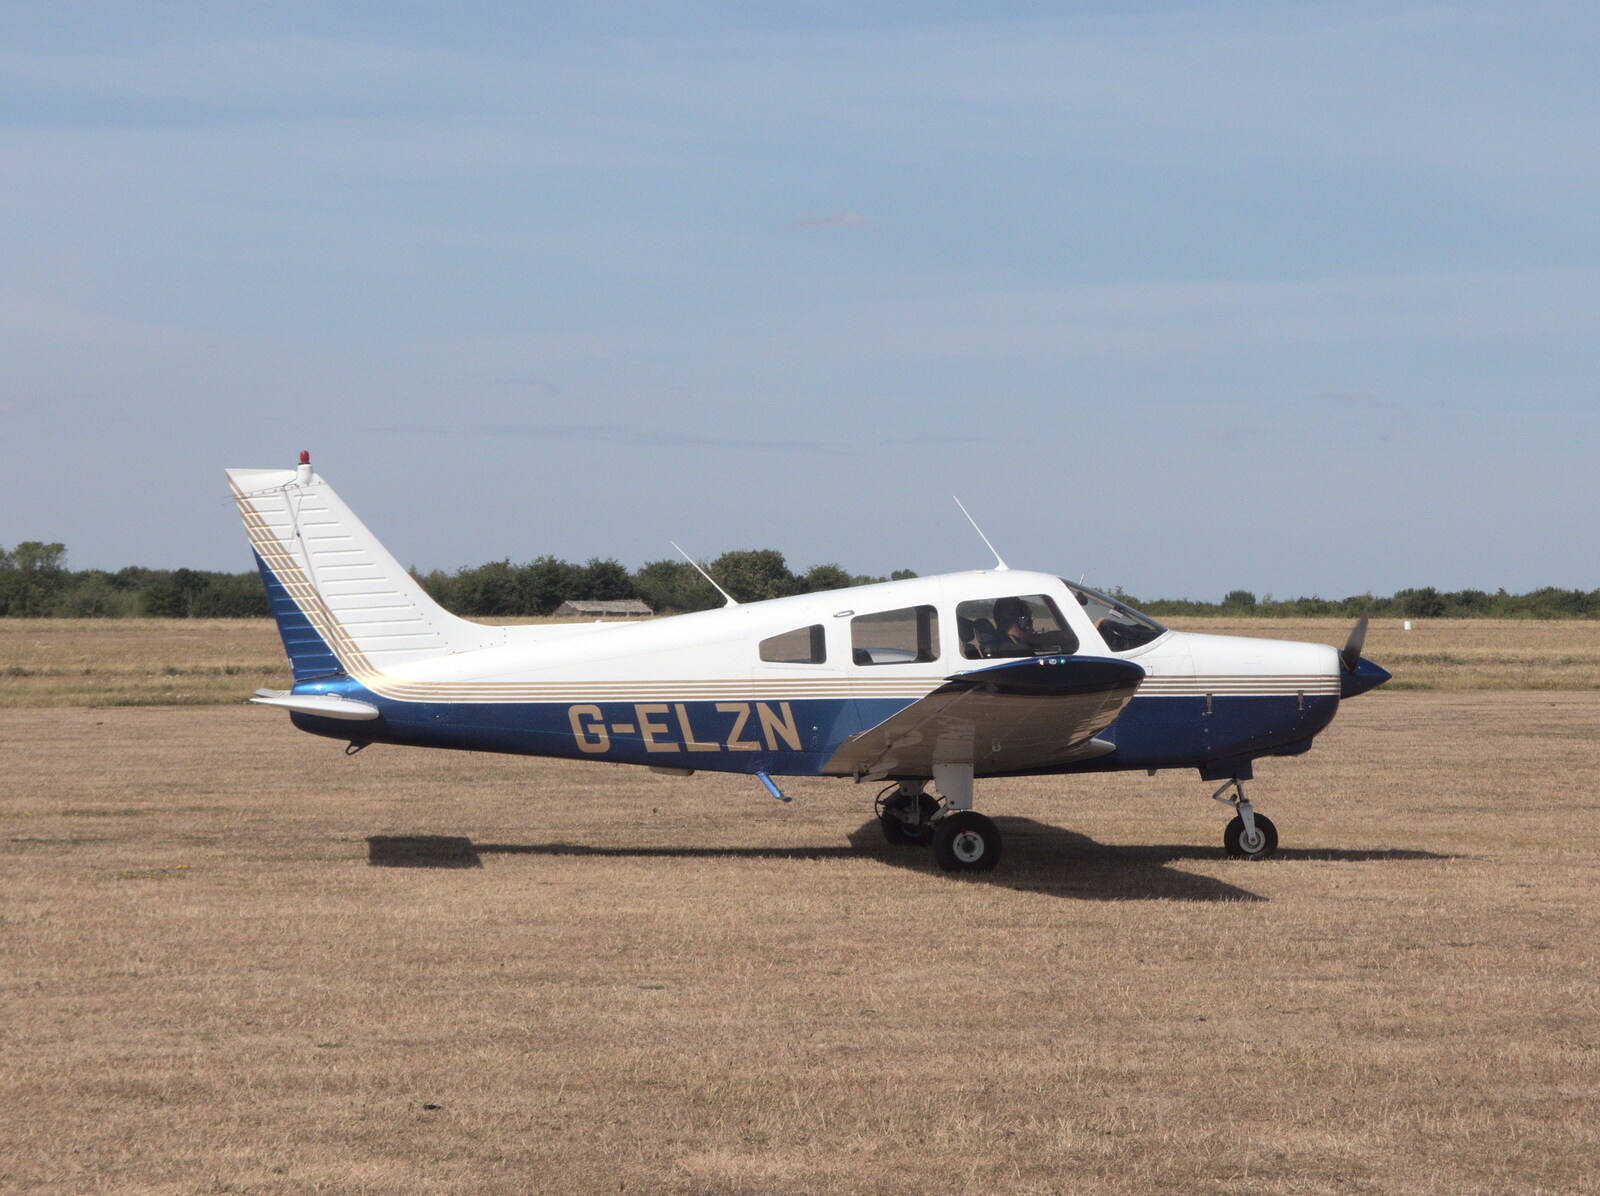 Piper G-ELZN taxis in after a lesson from A Trip to Old Buckenham Airfield, Norfolk - 6th August 2022